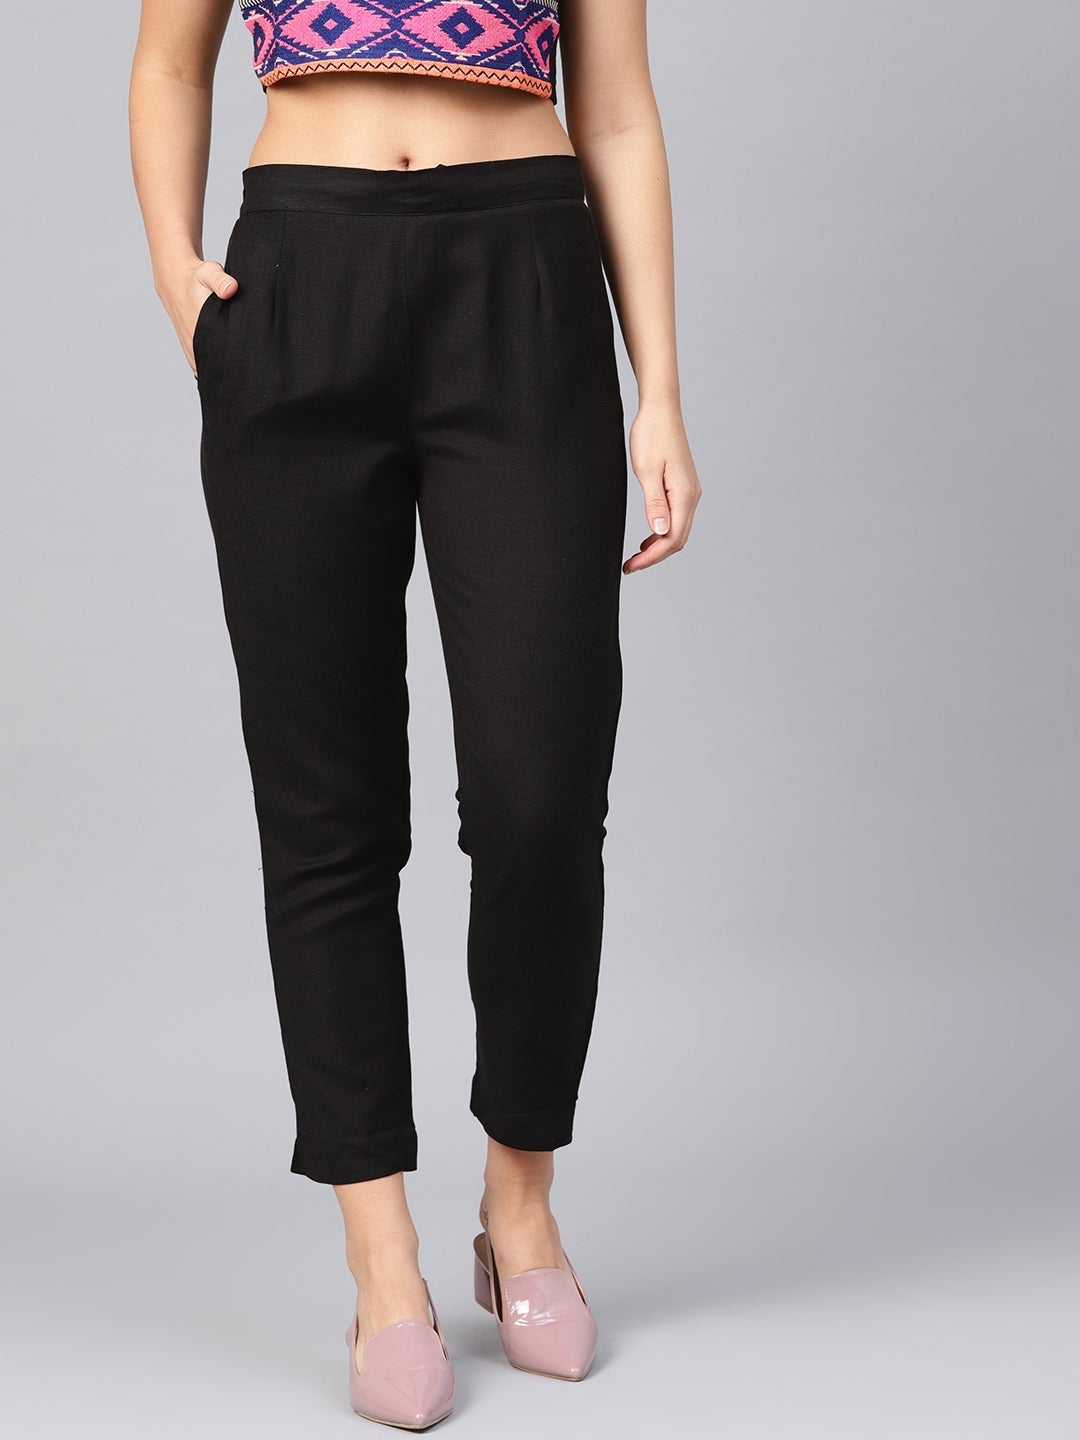 Juniper Black Solid Rayon Flex Slim Fit Women Pants With Two Pockets